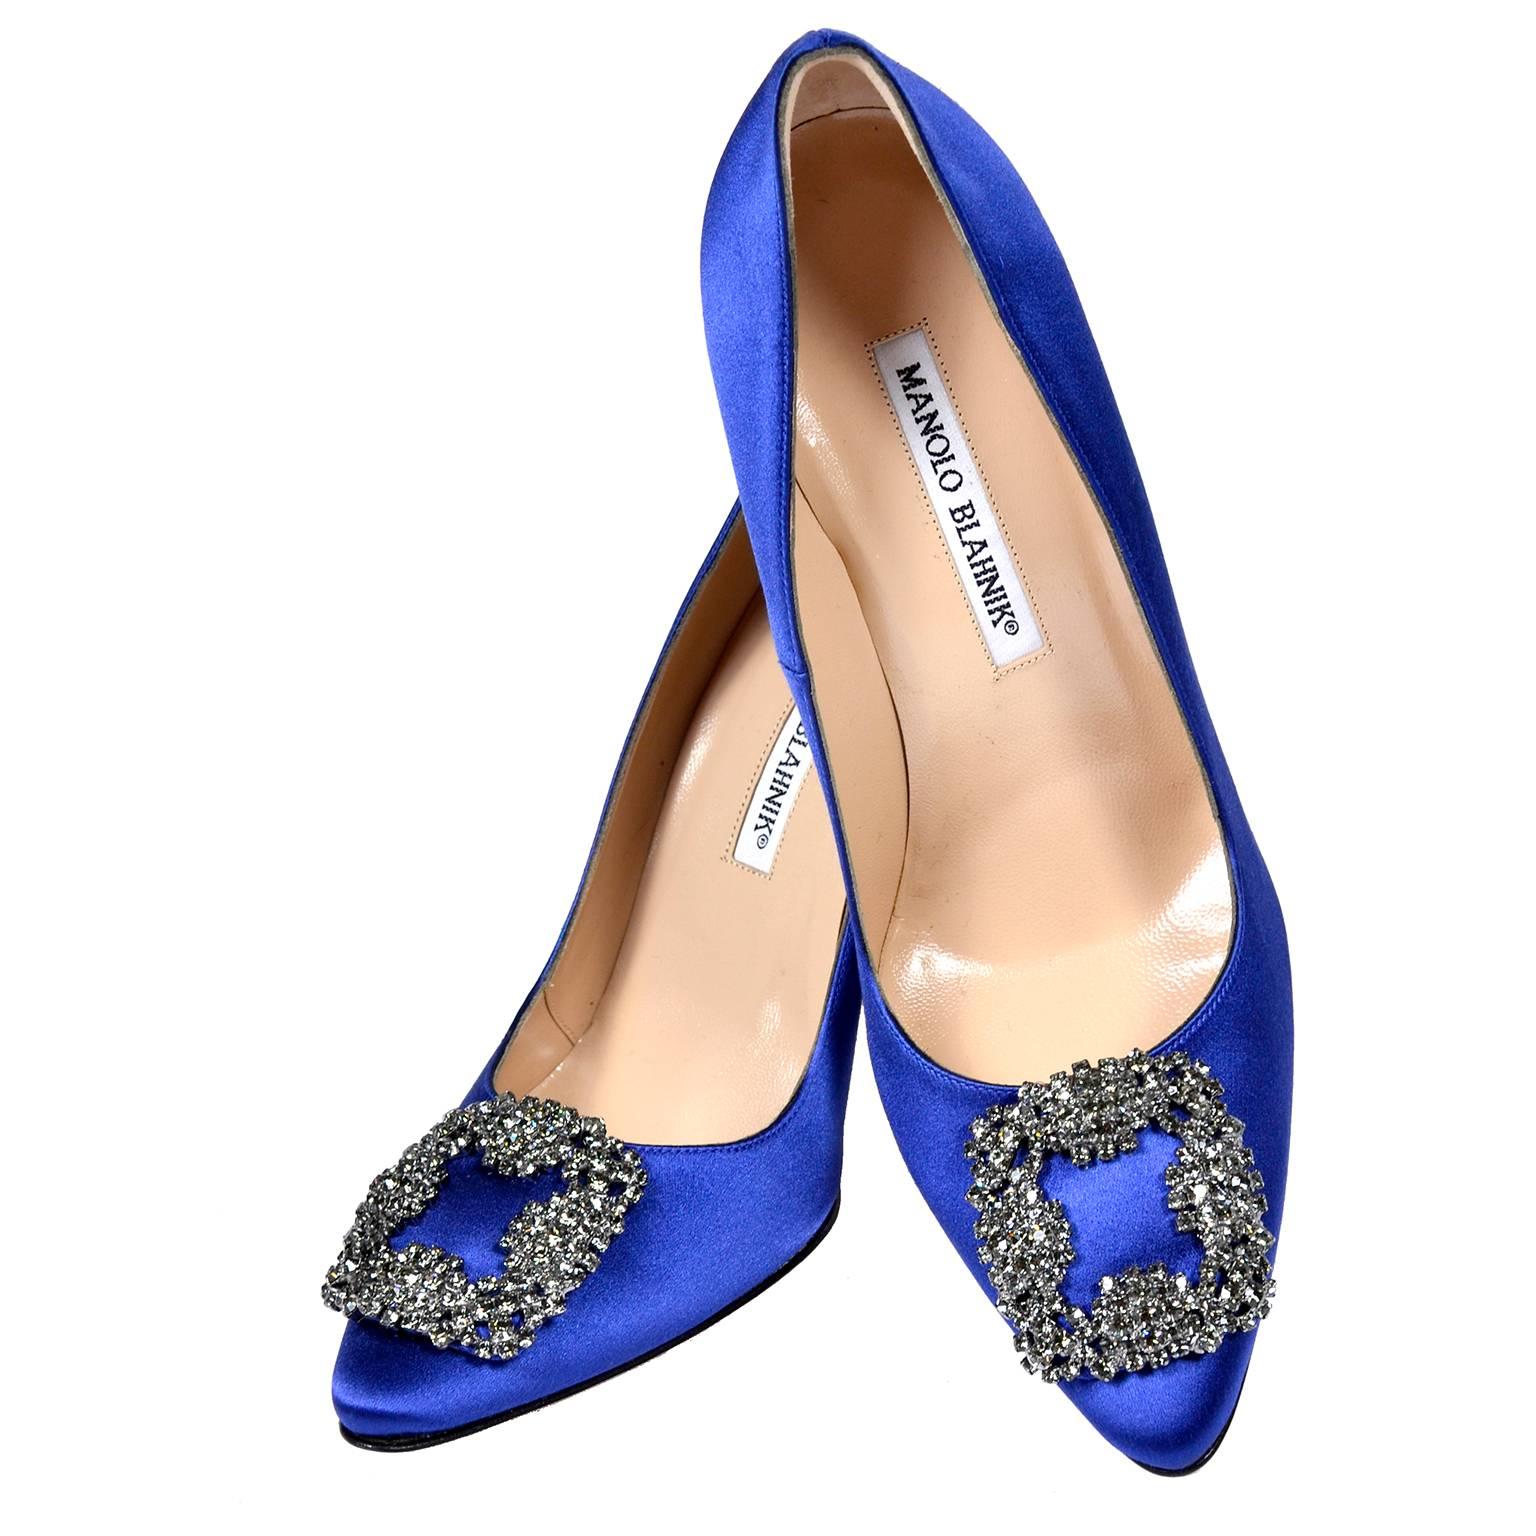 New Manolo Blahnik Carrie Bradshaw Blue Satin Shoes Lanza Heels in box 37.5  at 1stDibs